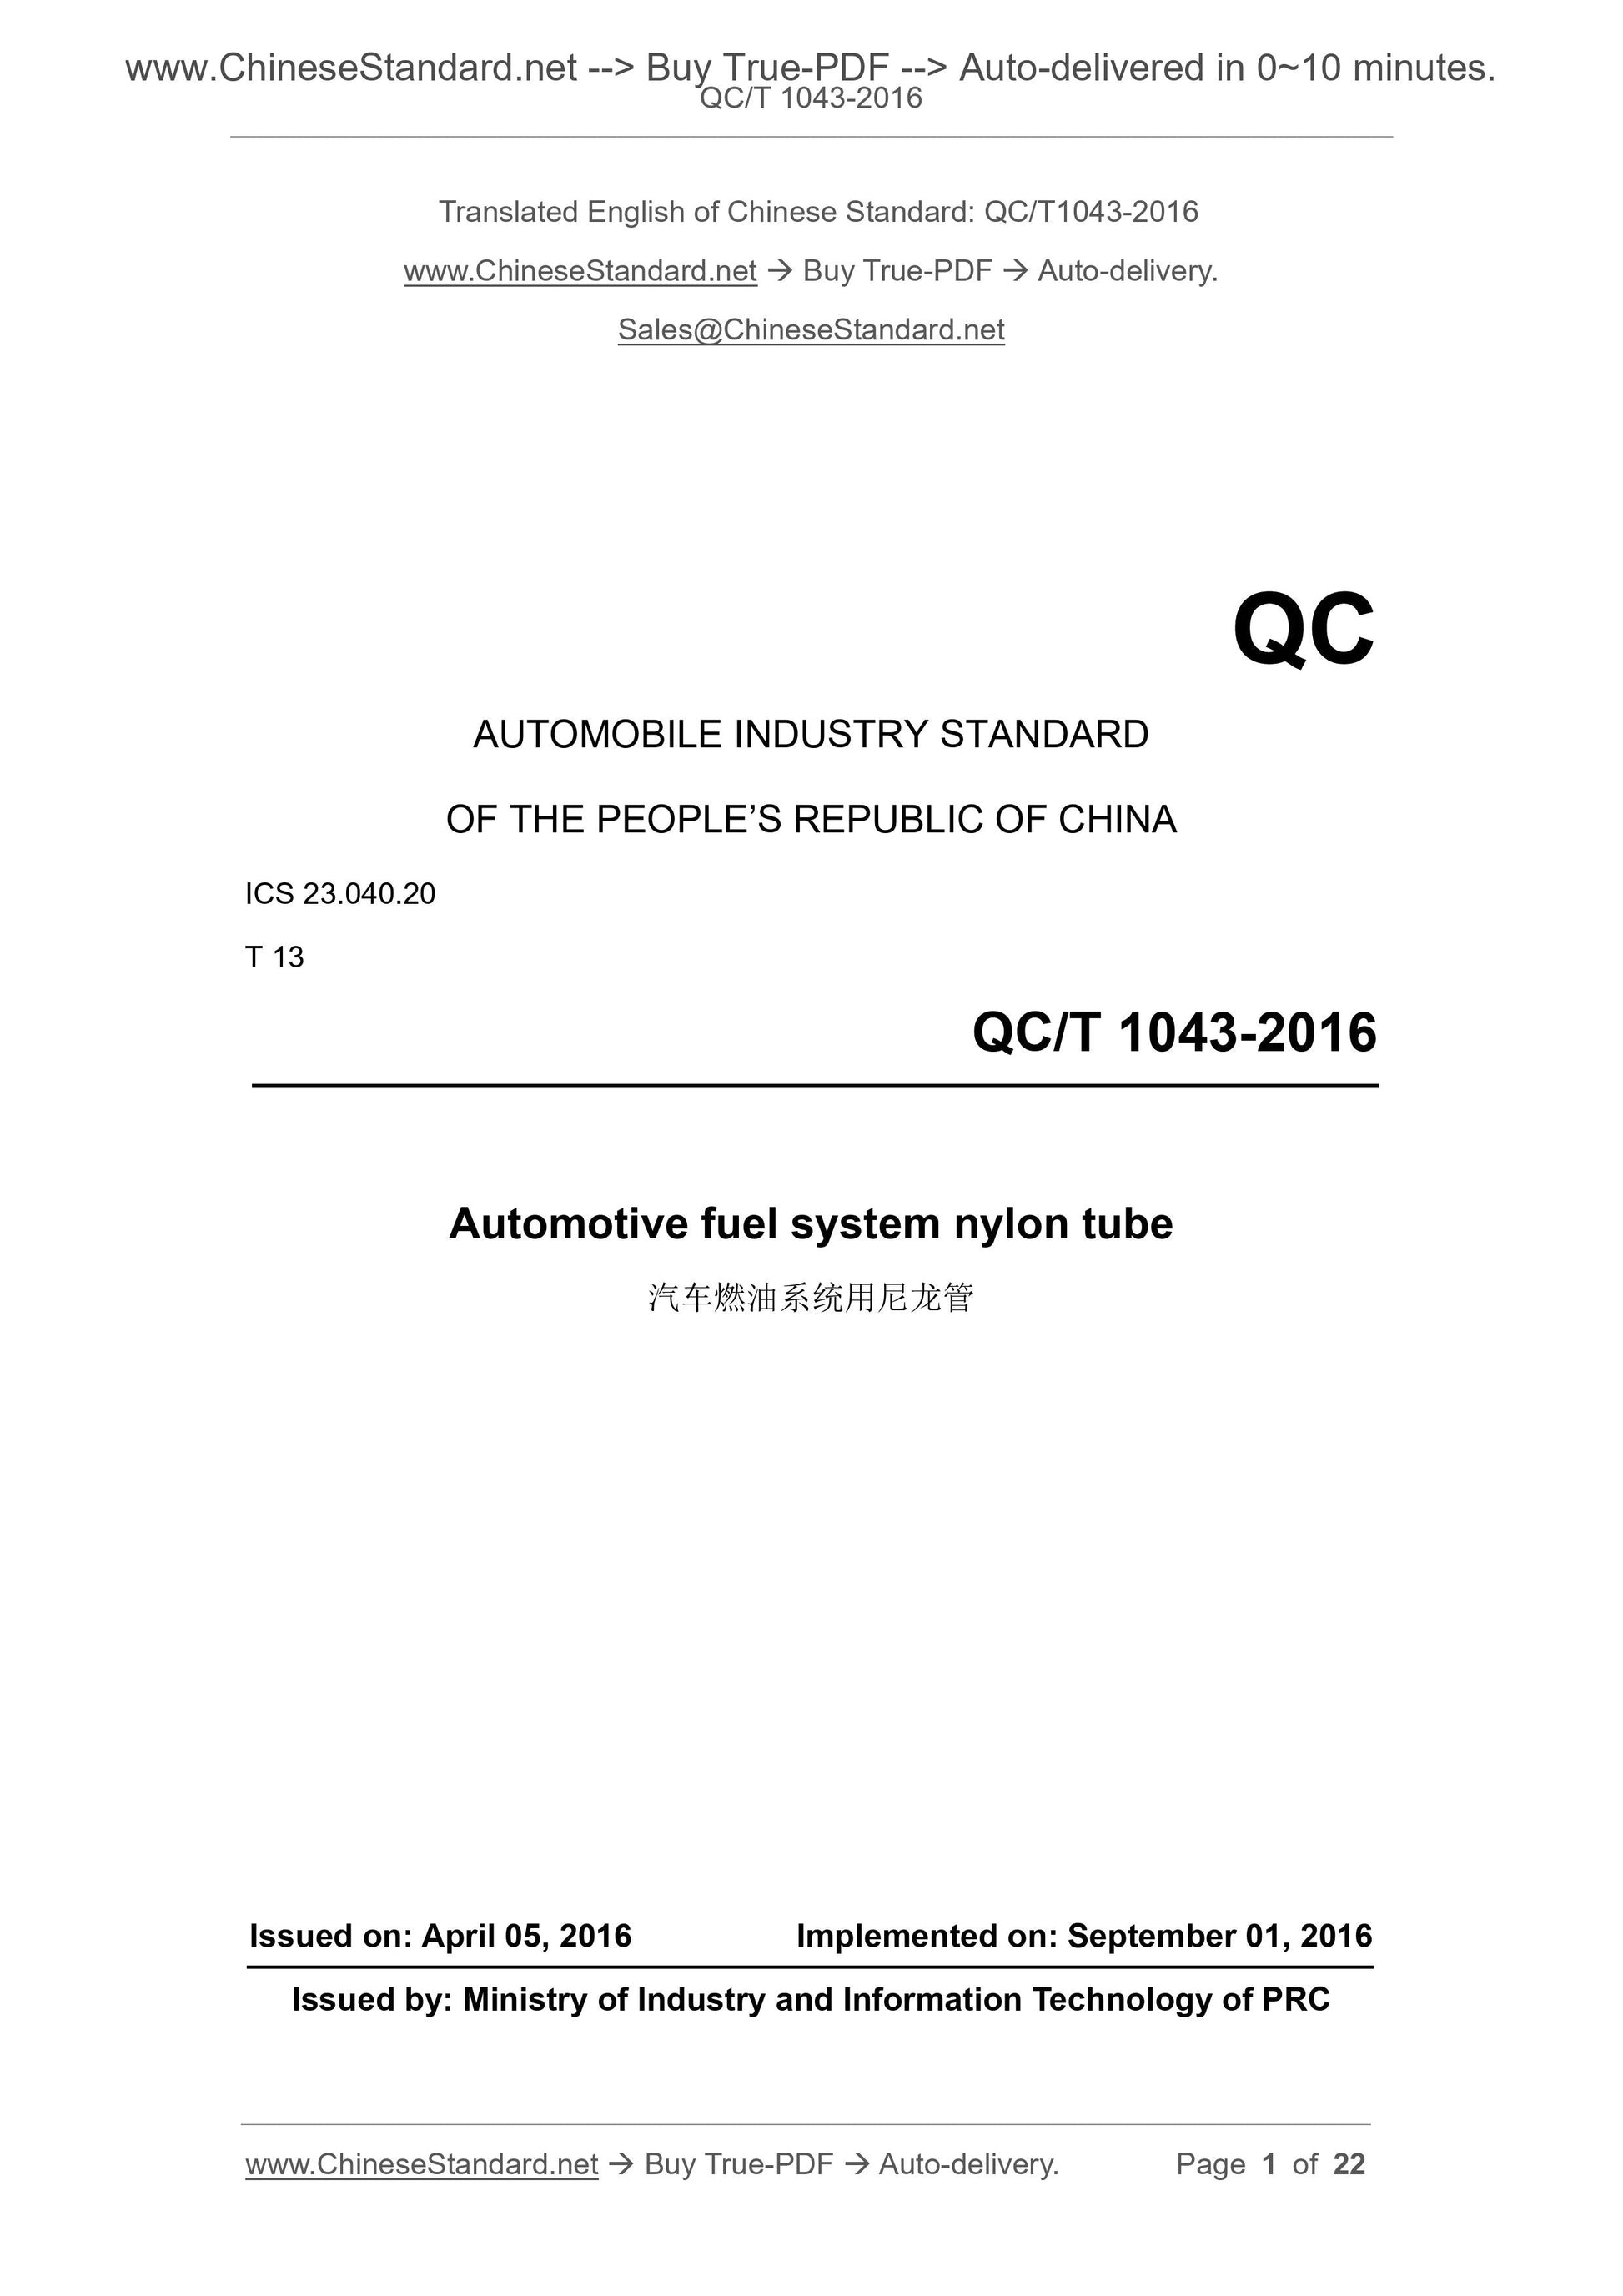 QC/T 1043-2016 Page 1